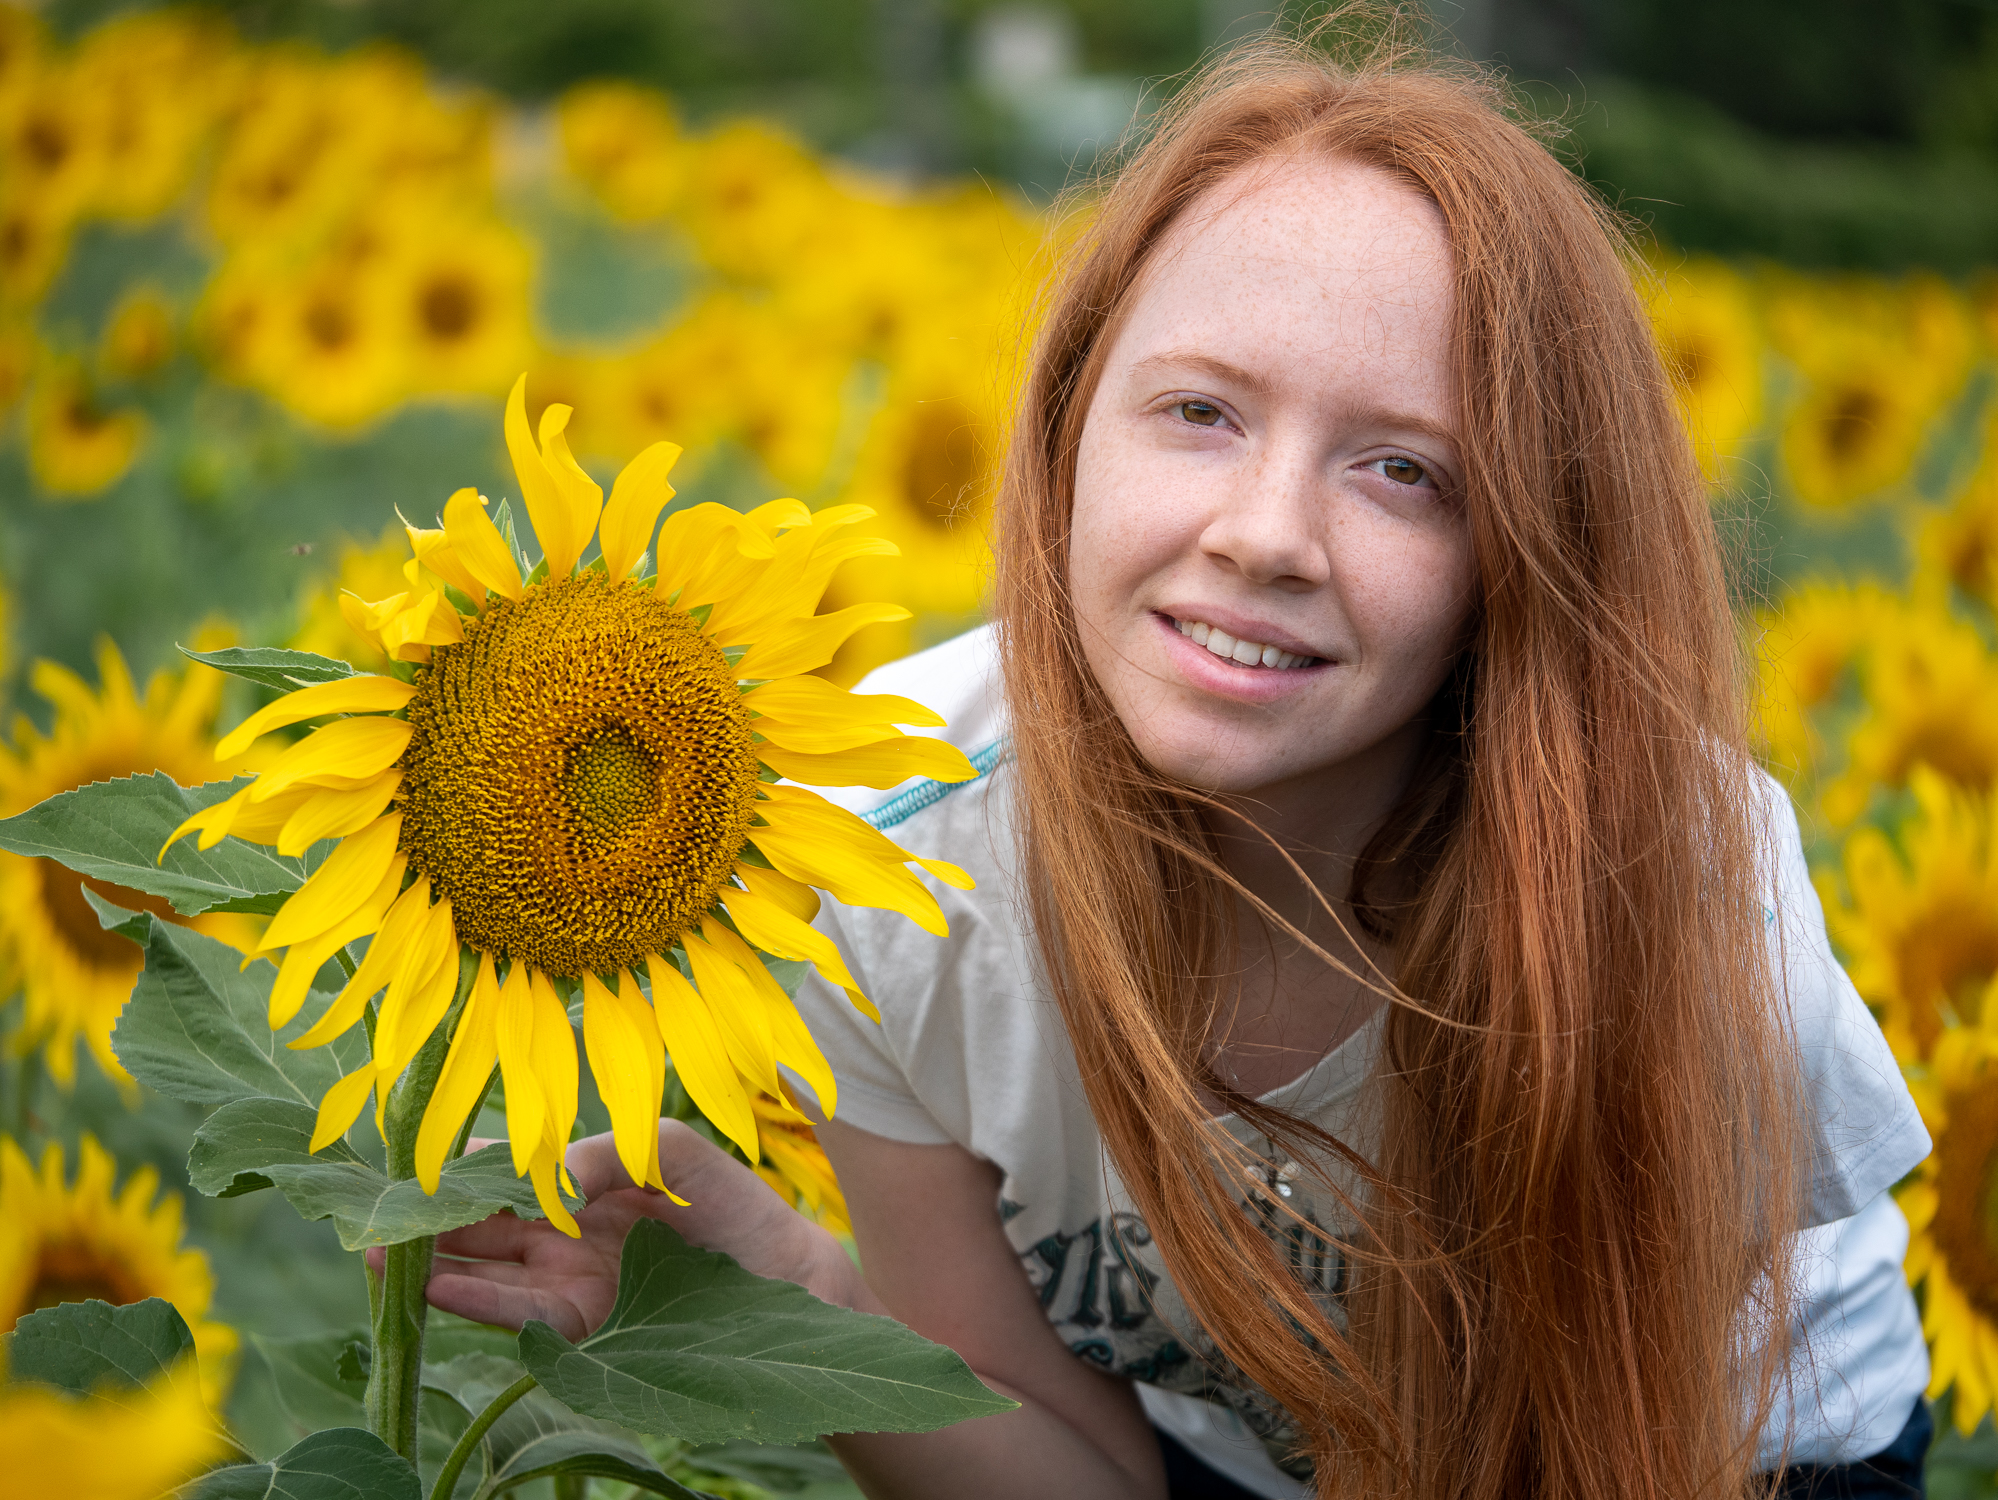 Portrait with sunflowers...